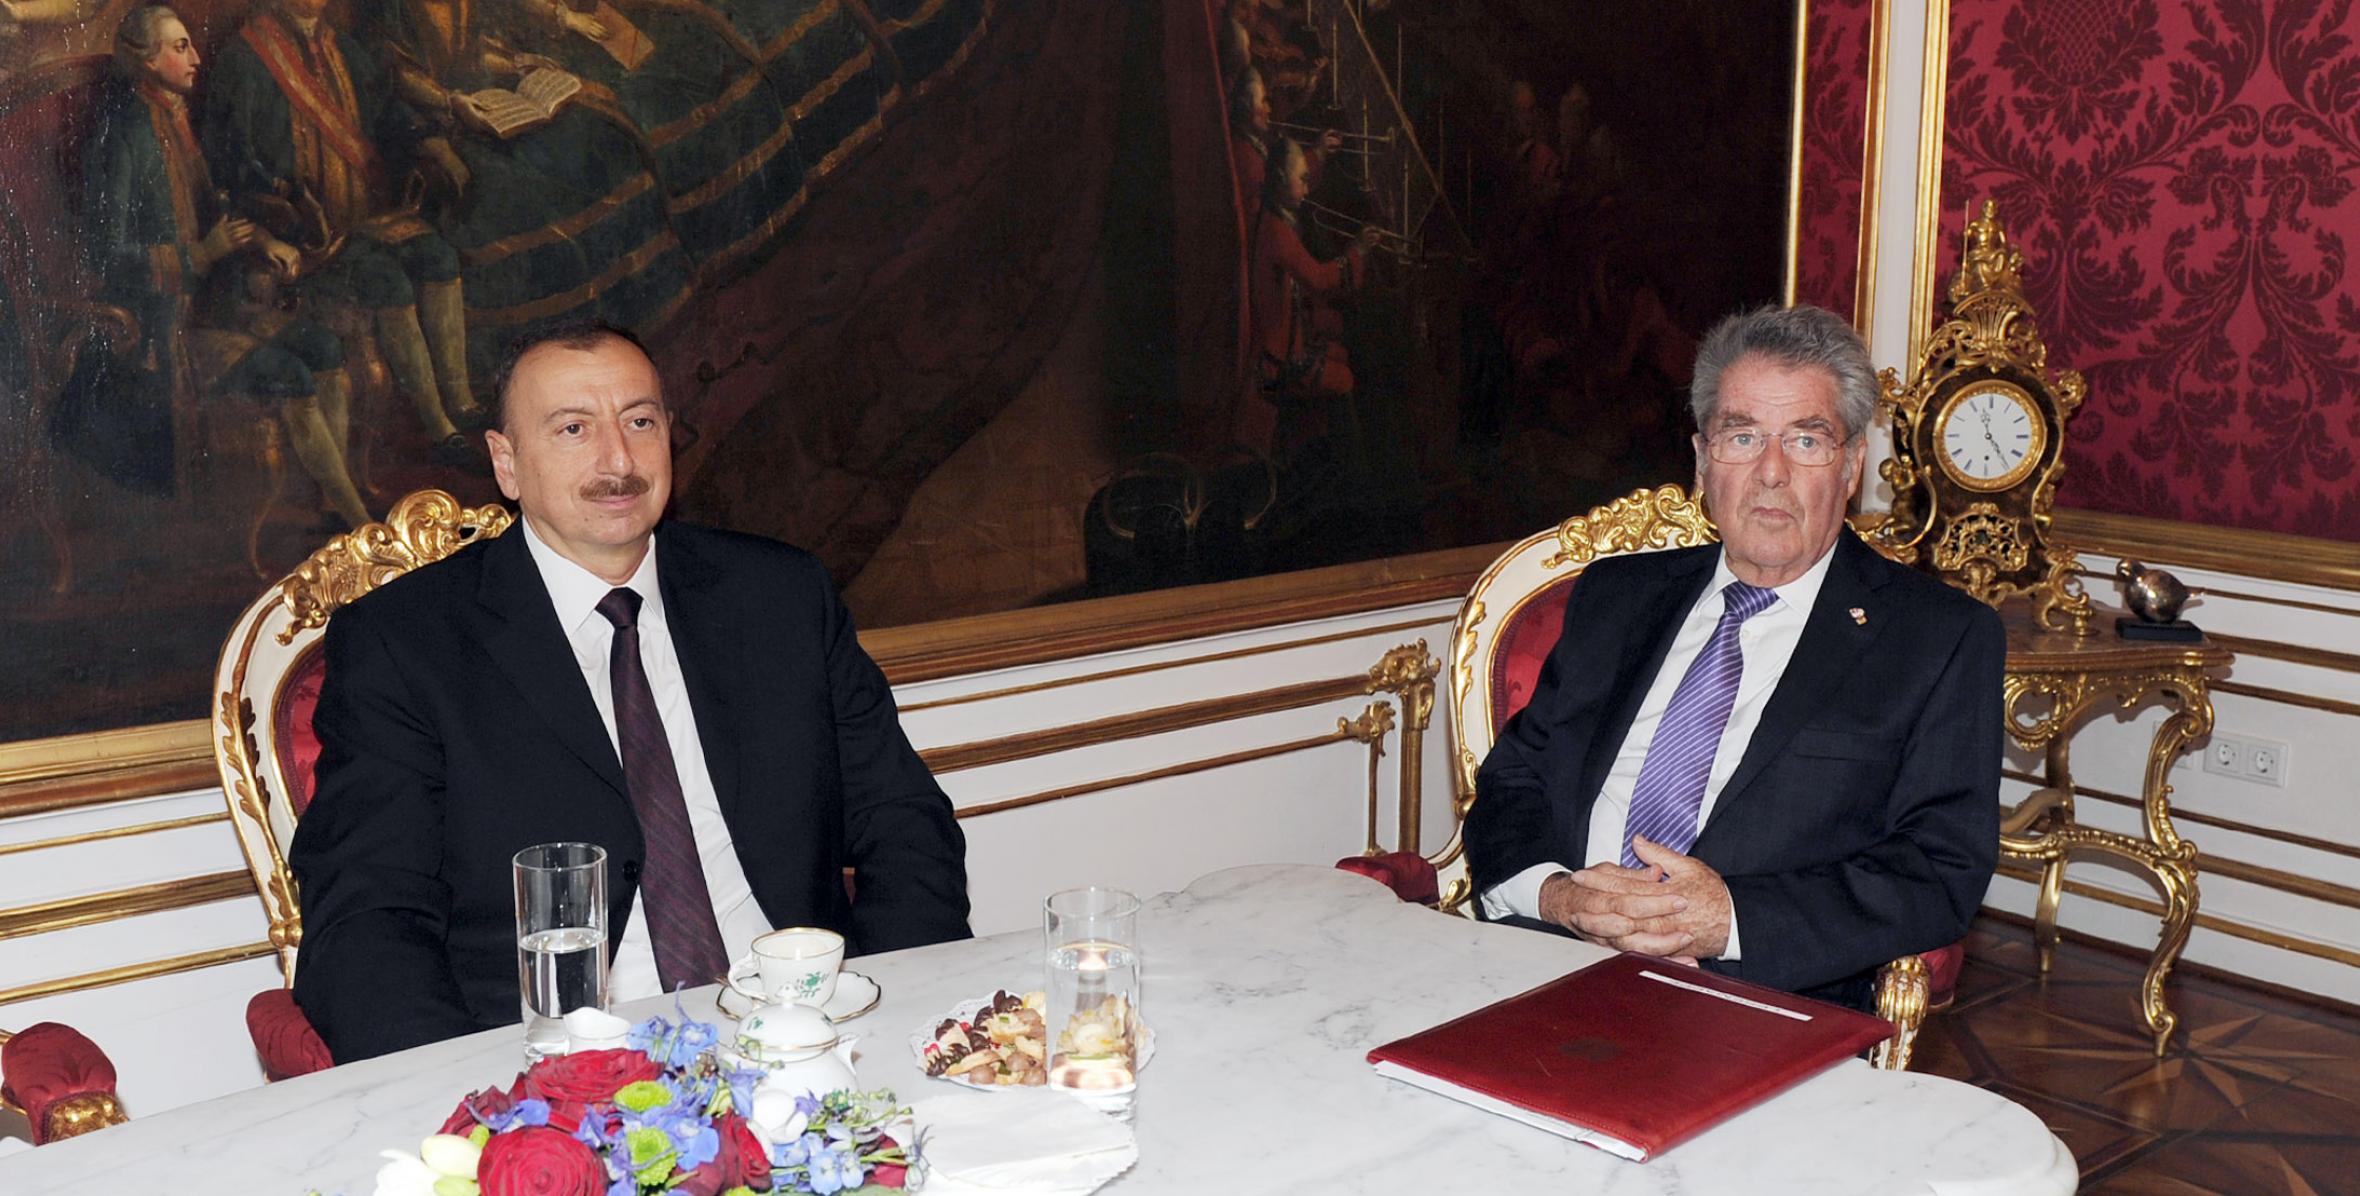 Ilham Aliyev and President of the Republic of Austria Heinz Fischer had a one-on-one meeting